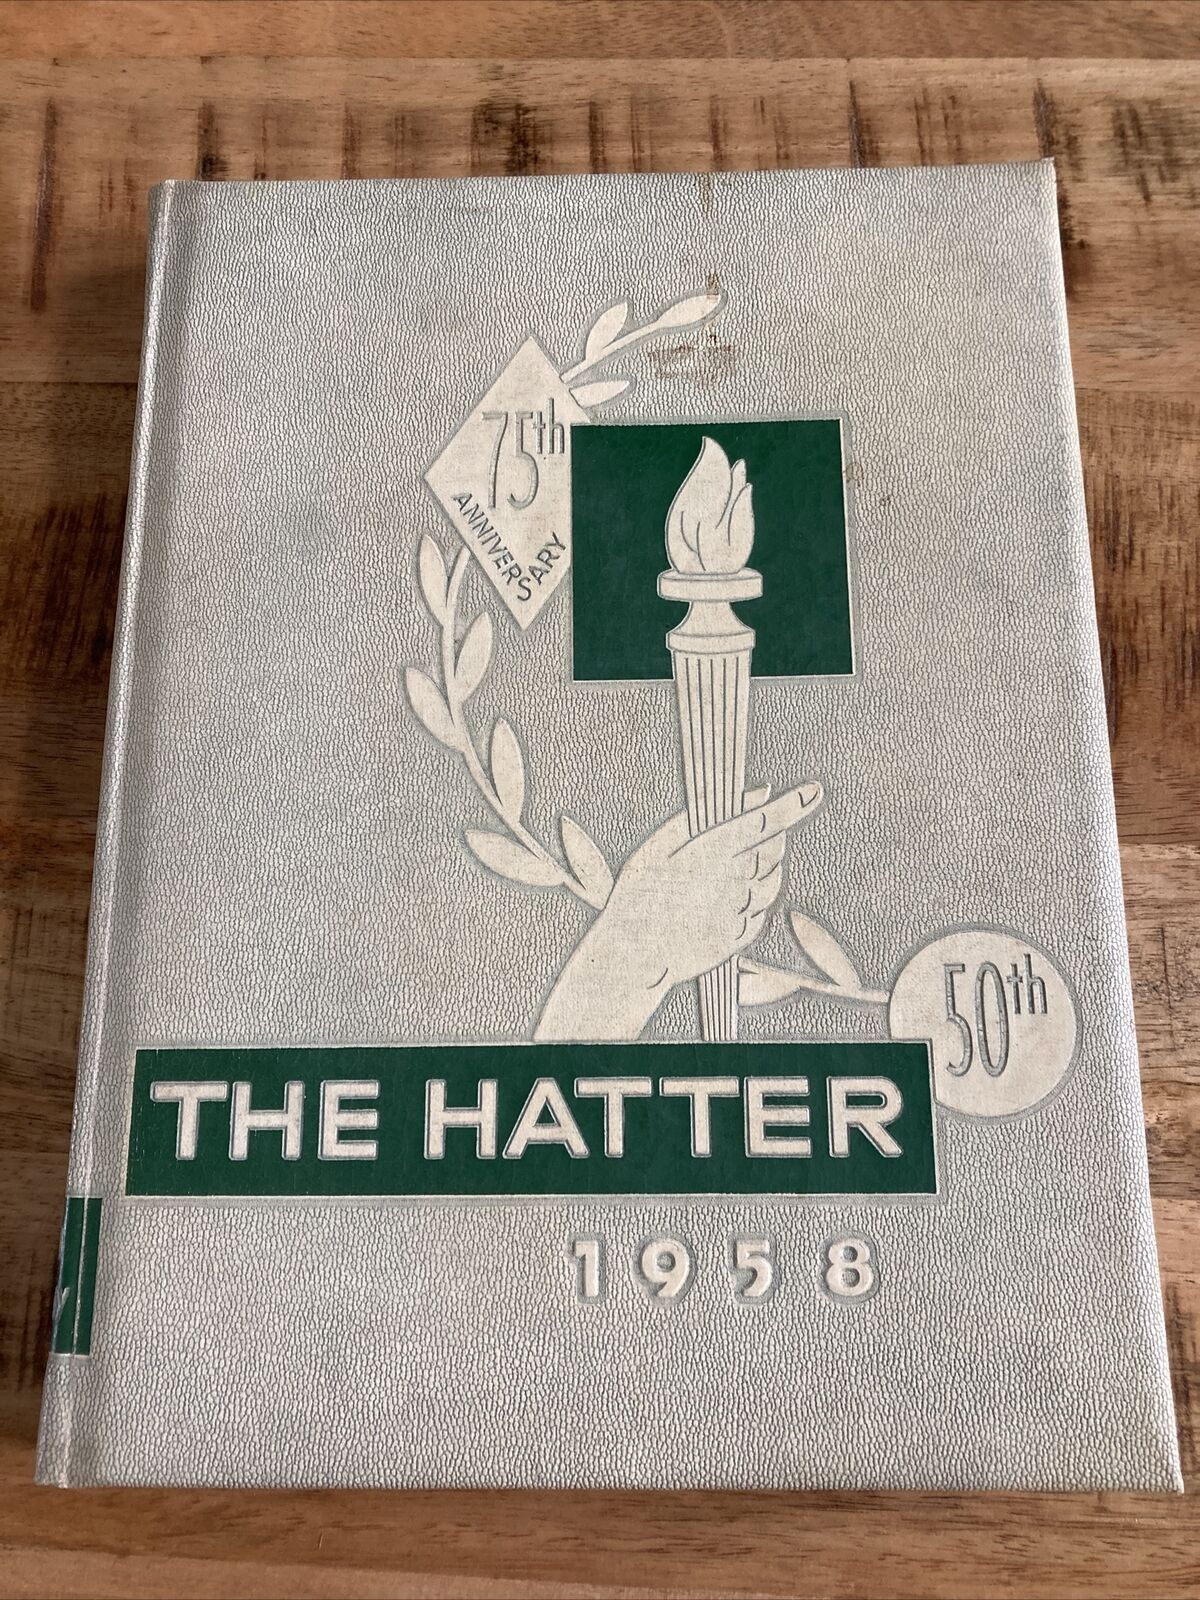 1958 Stetson University Yearbook Annual The Hatter DeLand Florida 75th Anniv.